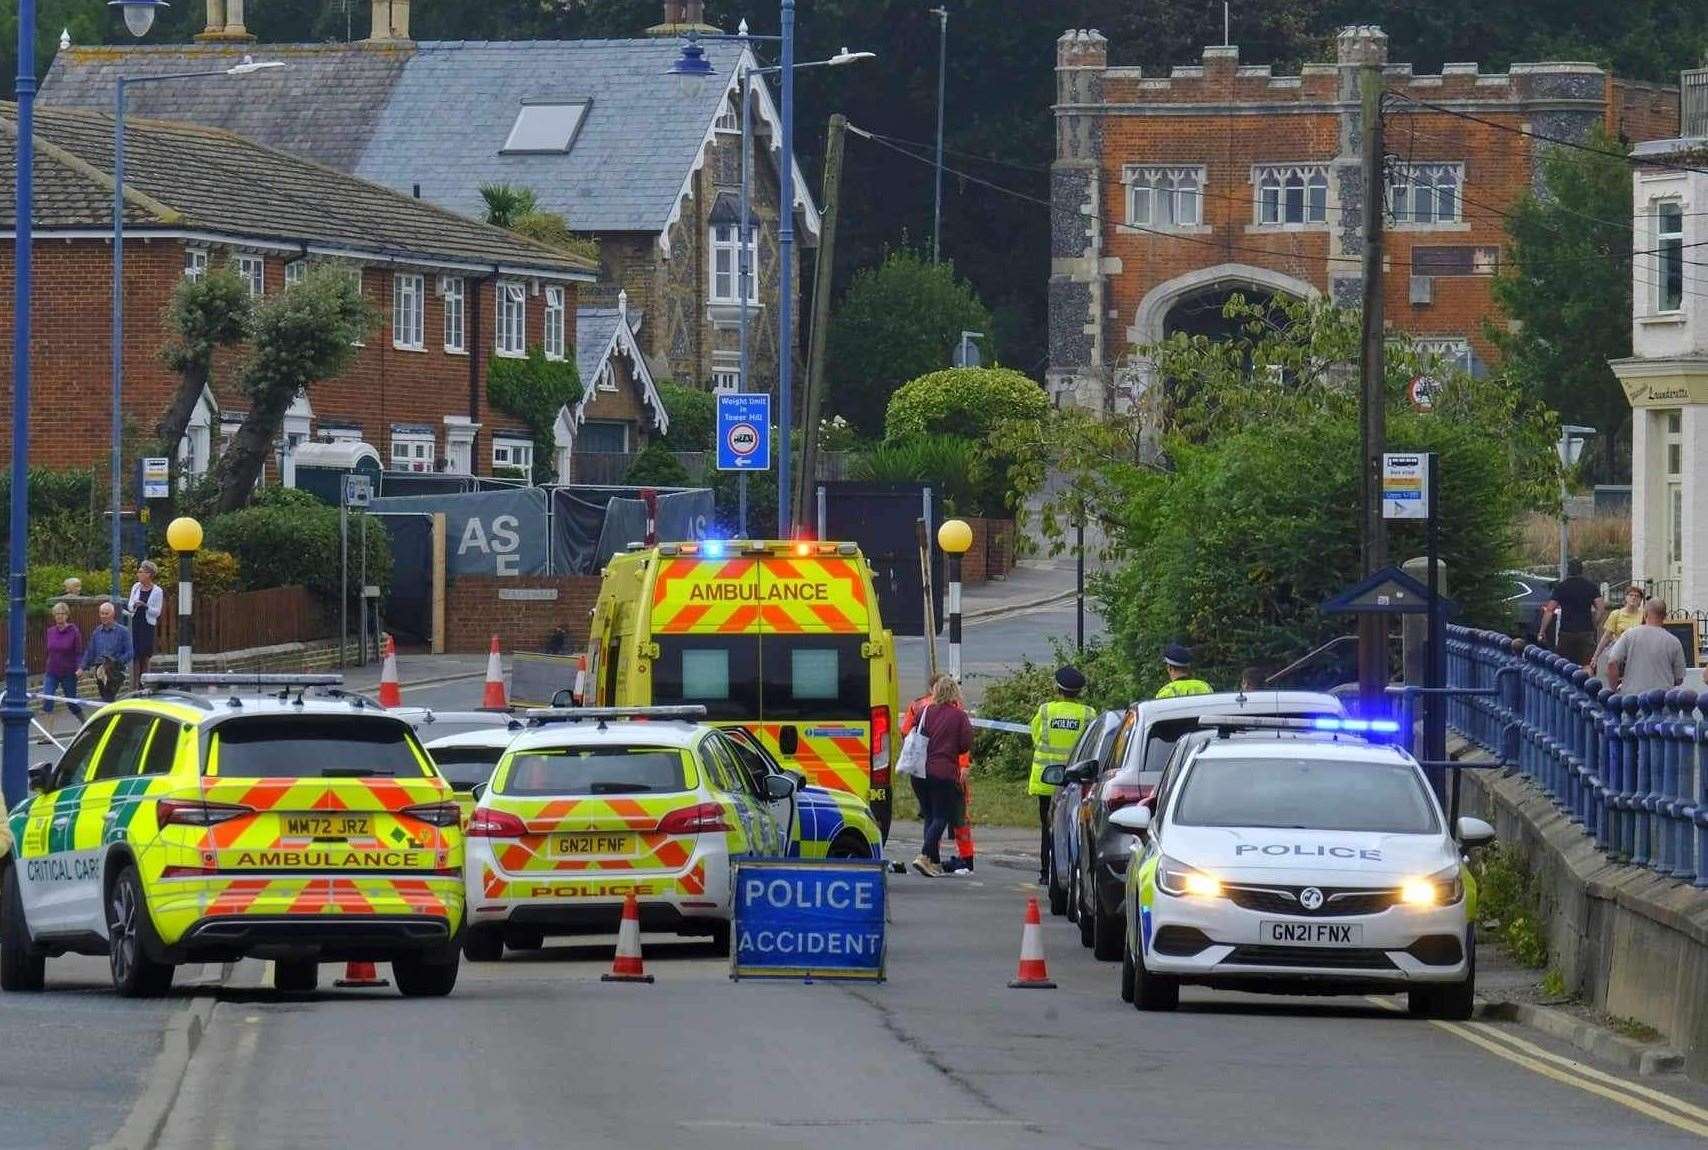 Emergency services were called to Tower Parade in Whitstable after reports of an accident. Picture: Tom Banbury